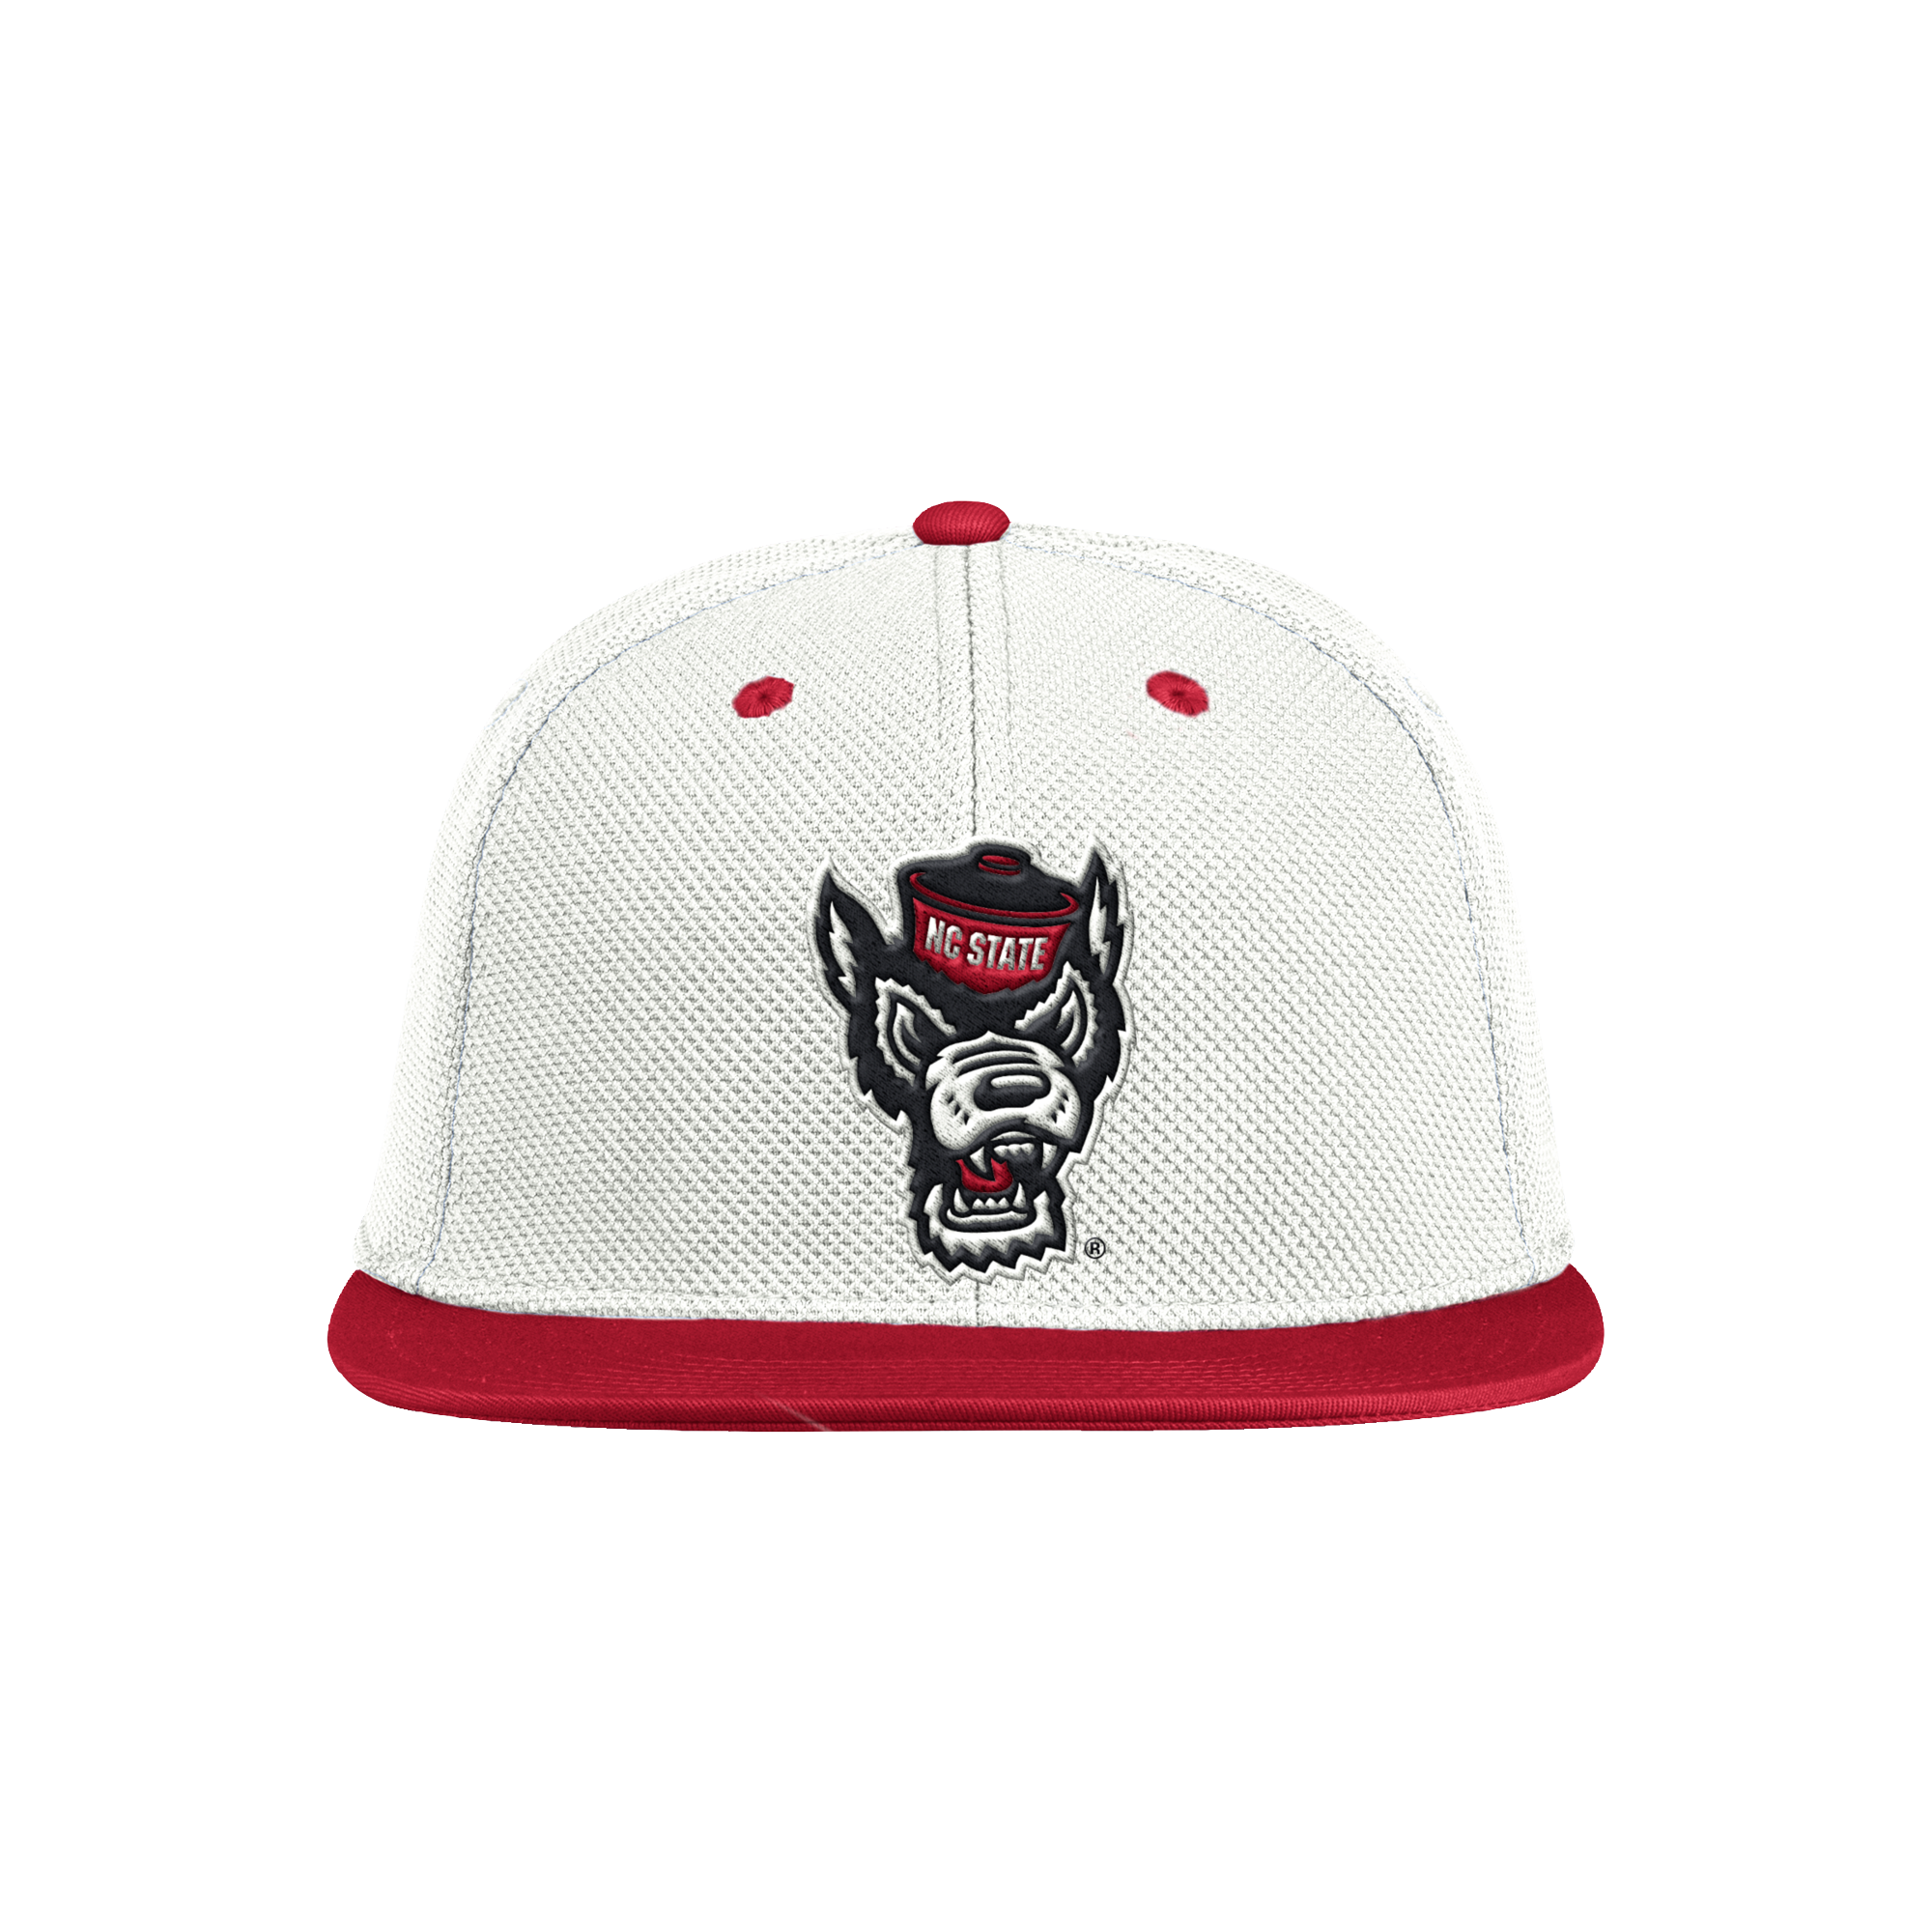 NC State Wolfpack Adidas White w/ Red Bill On-Field Baseball Fitted Mesh Hat 6 3/4